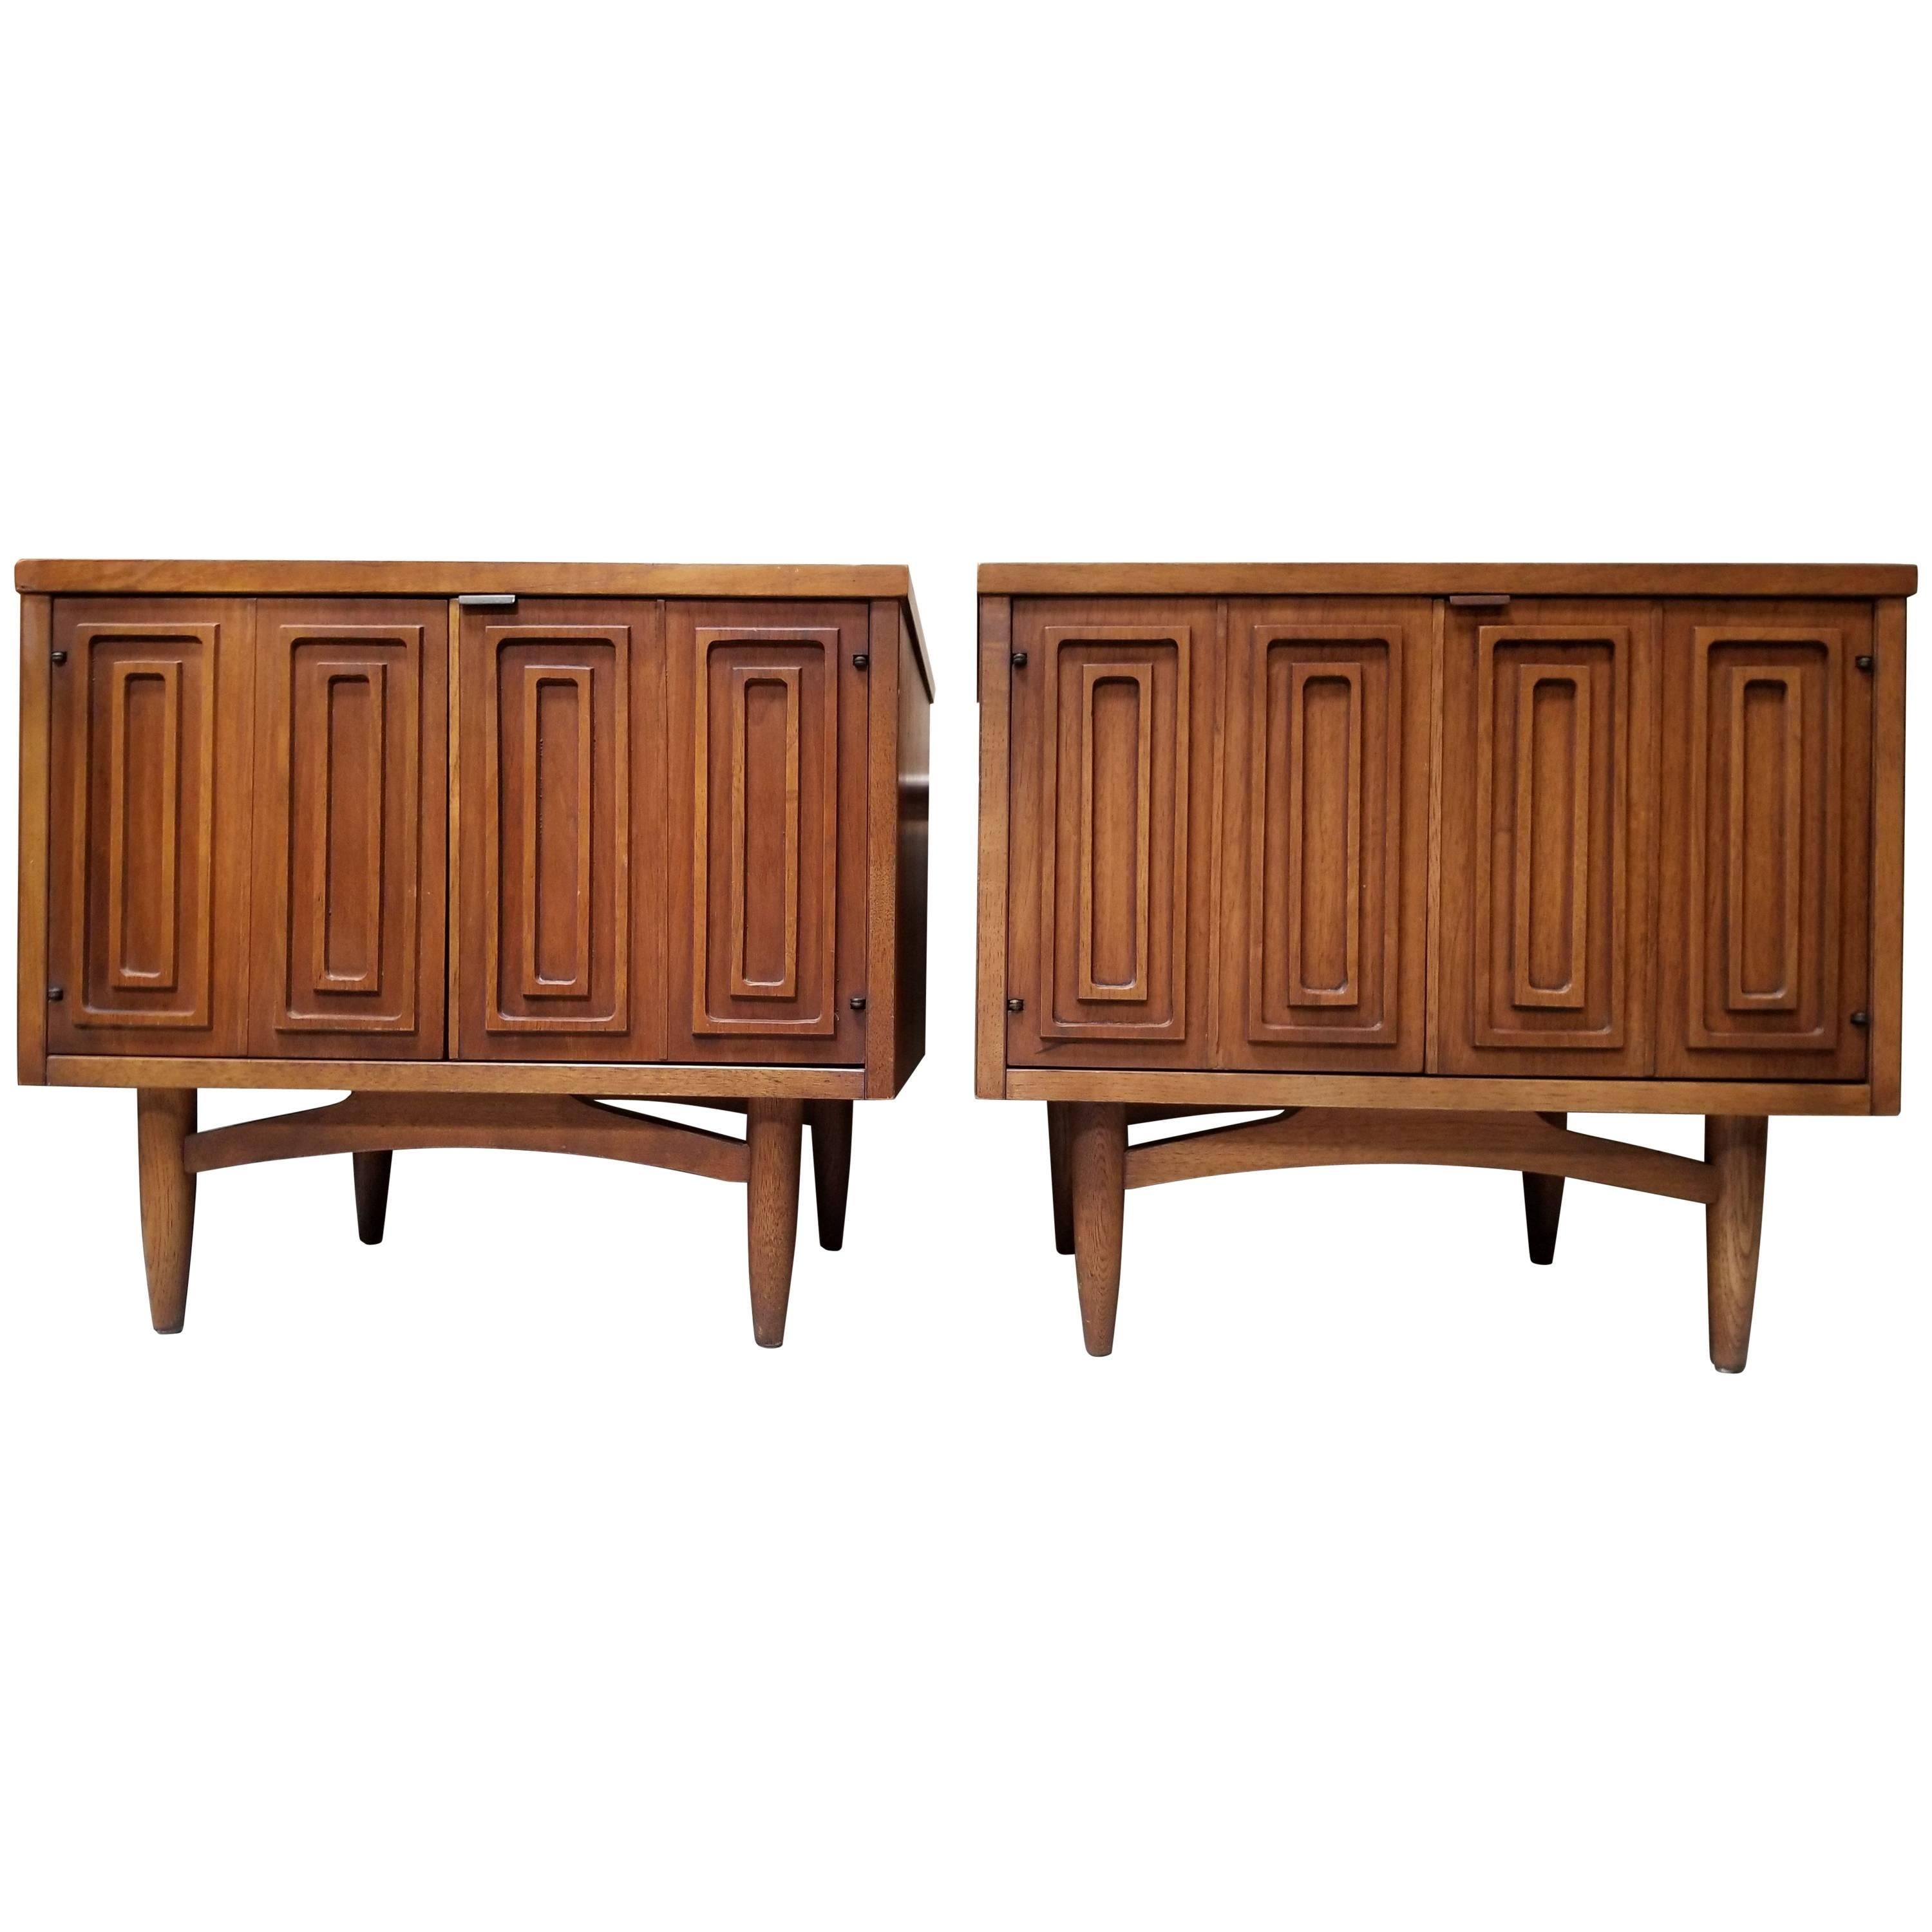 Pair of Broyhill "Sculptra" Night Stands